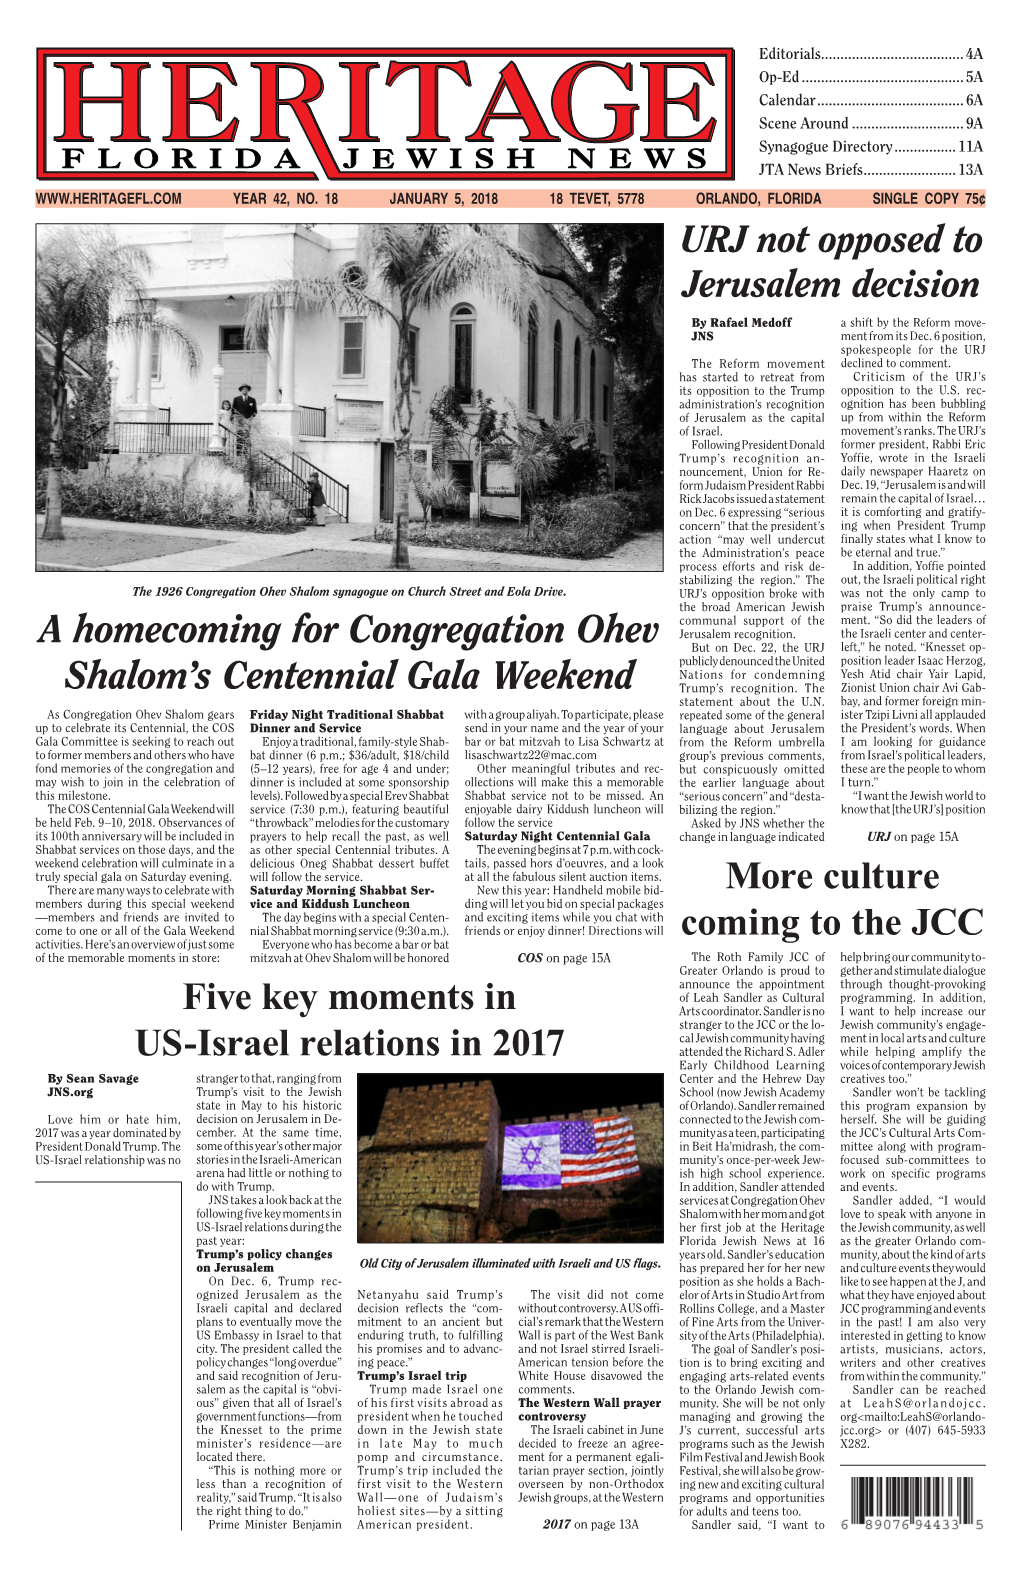 More Culture Coming to the JCC a Homecoming for Congregation